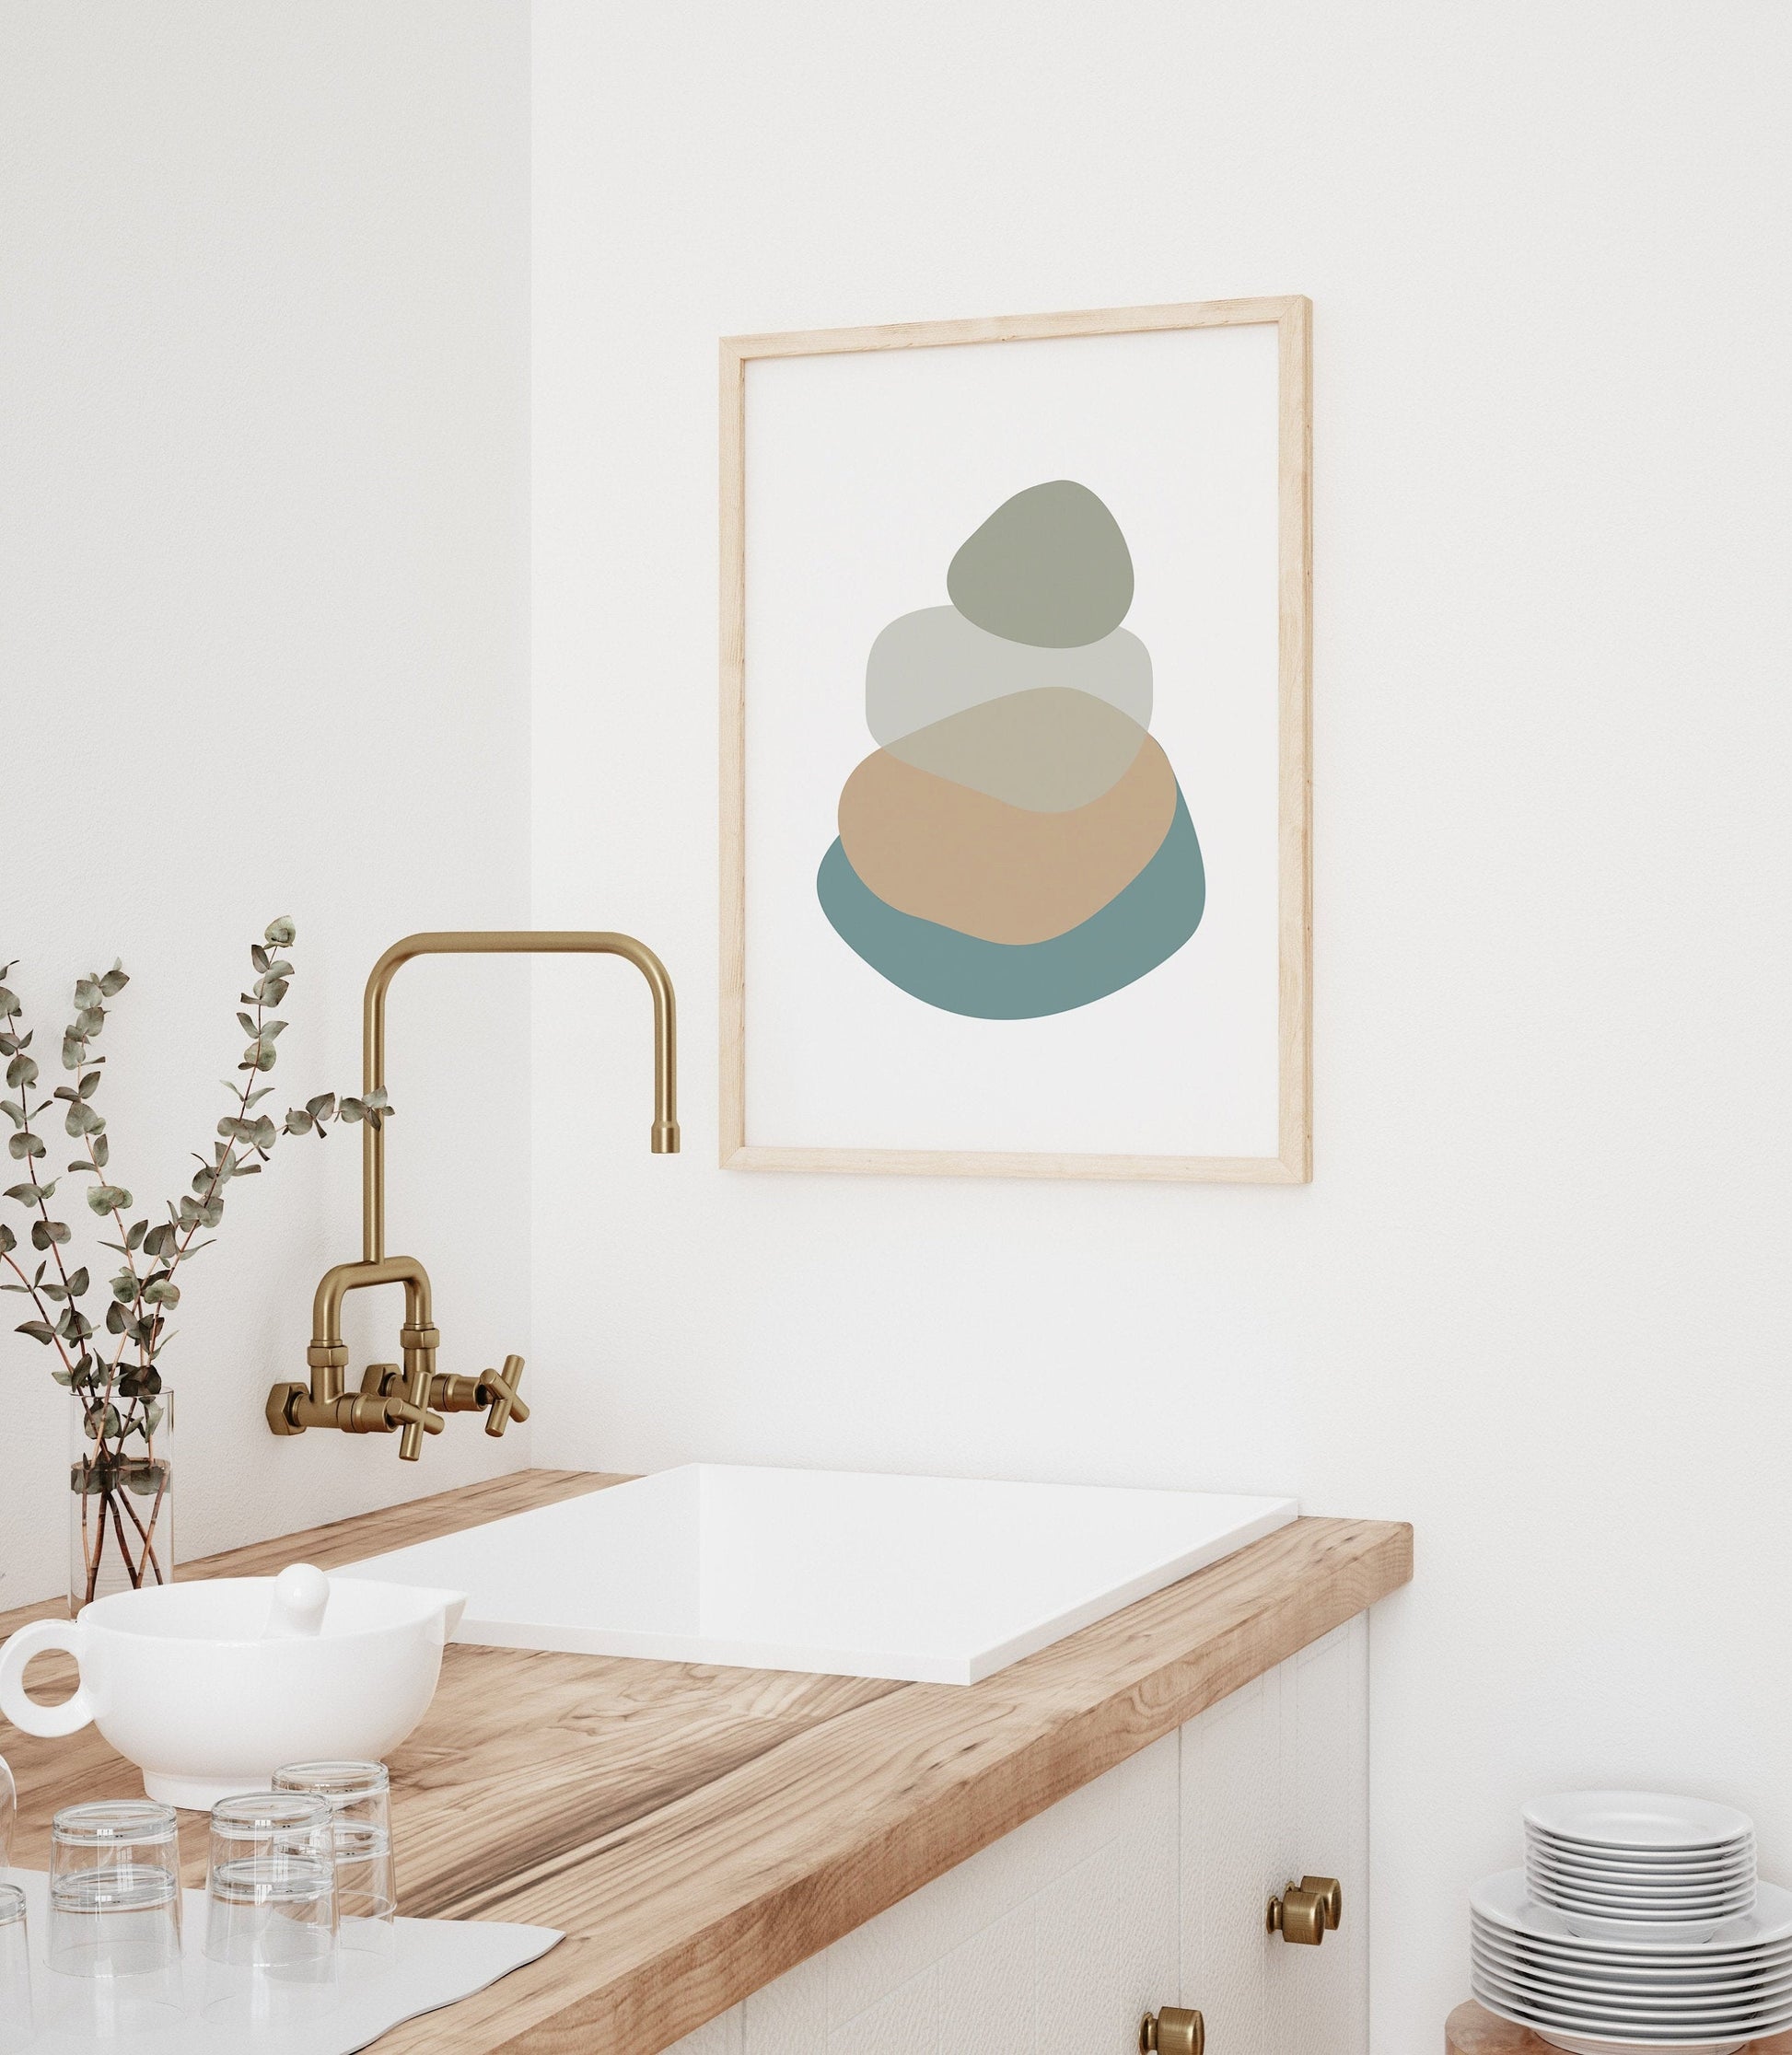 Bathroom Wall Art - Sage Green, Aegean Teal Blue Beige - Abstract Mid-Century Modern Wall Print - Oversized Art - Color Changes available